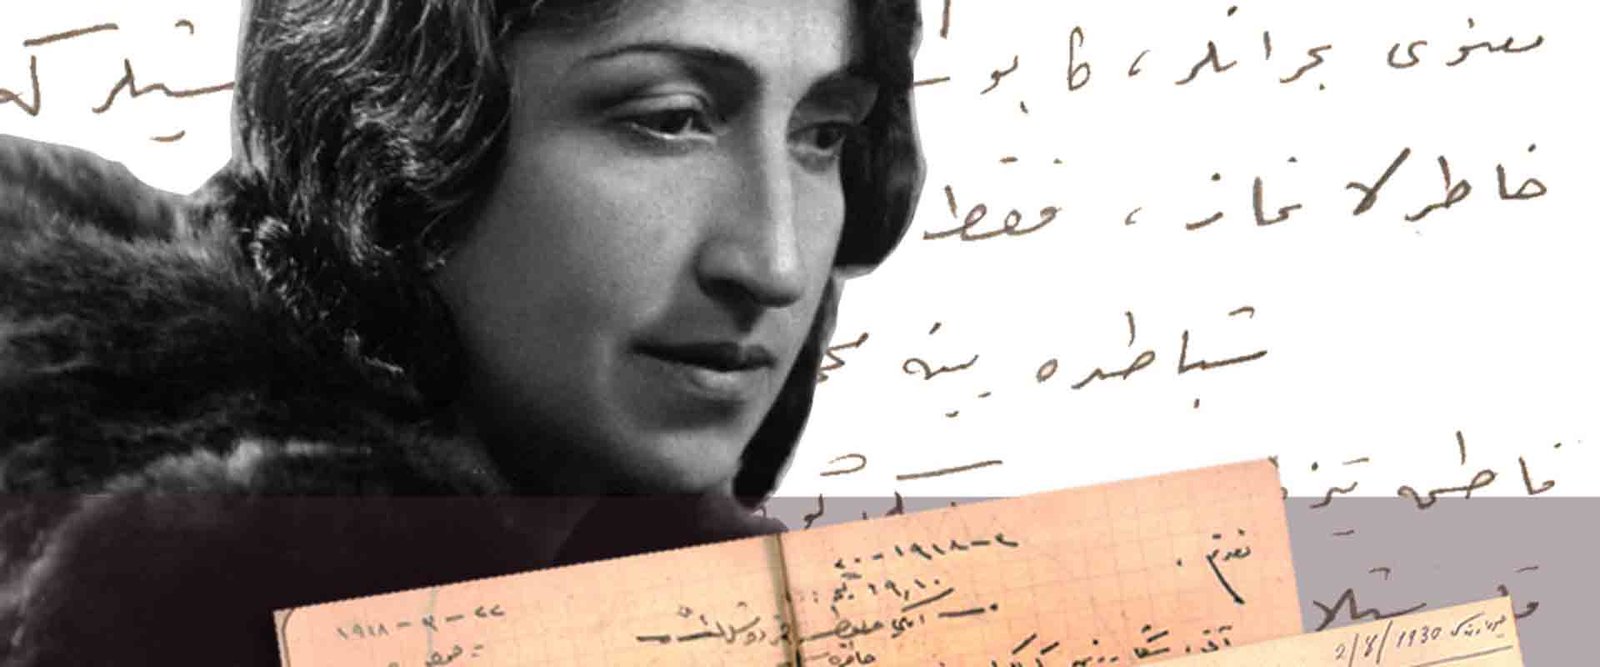 The diaries and letters belonging to Halide Nusret Zorlutuna are kept at the Women's Works Library and Information Center Foundation